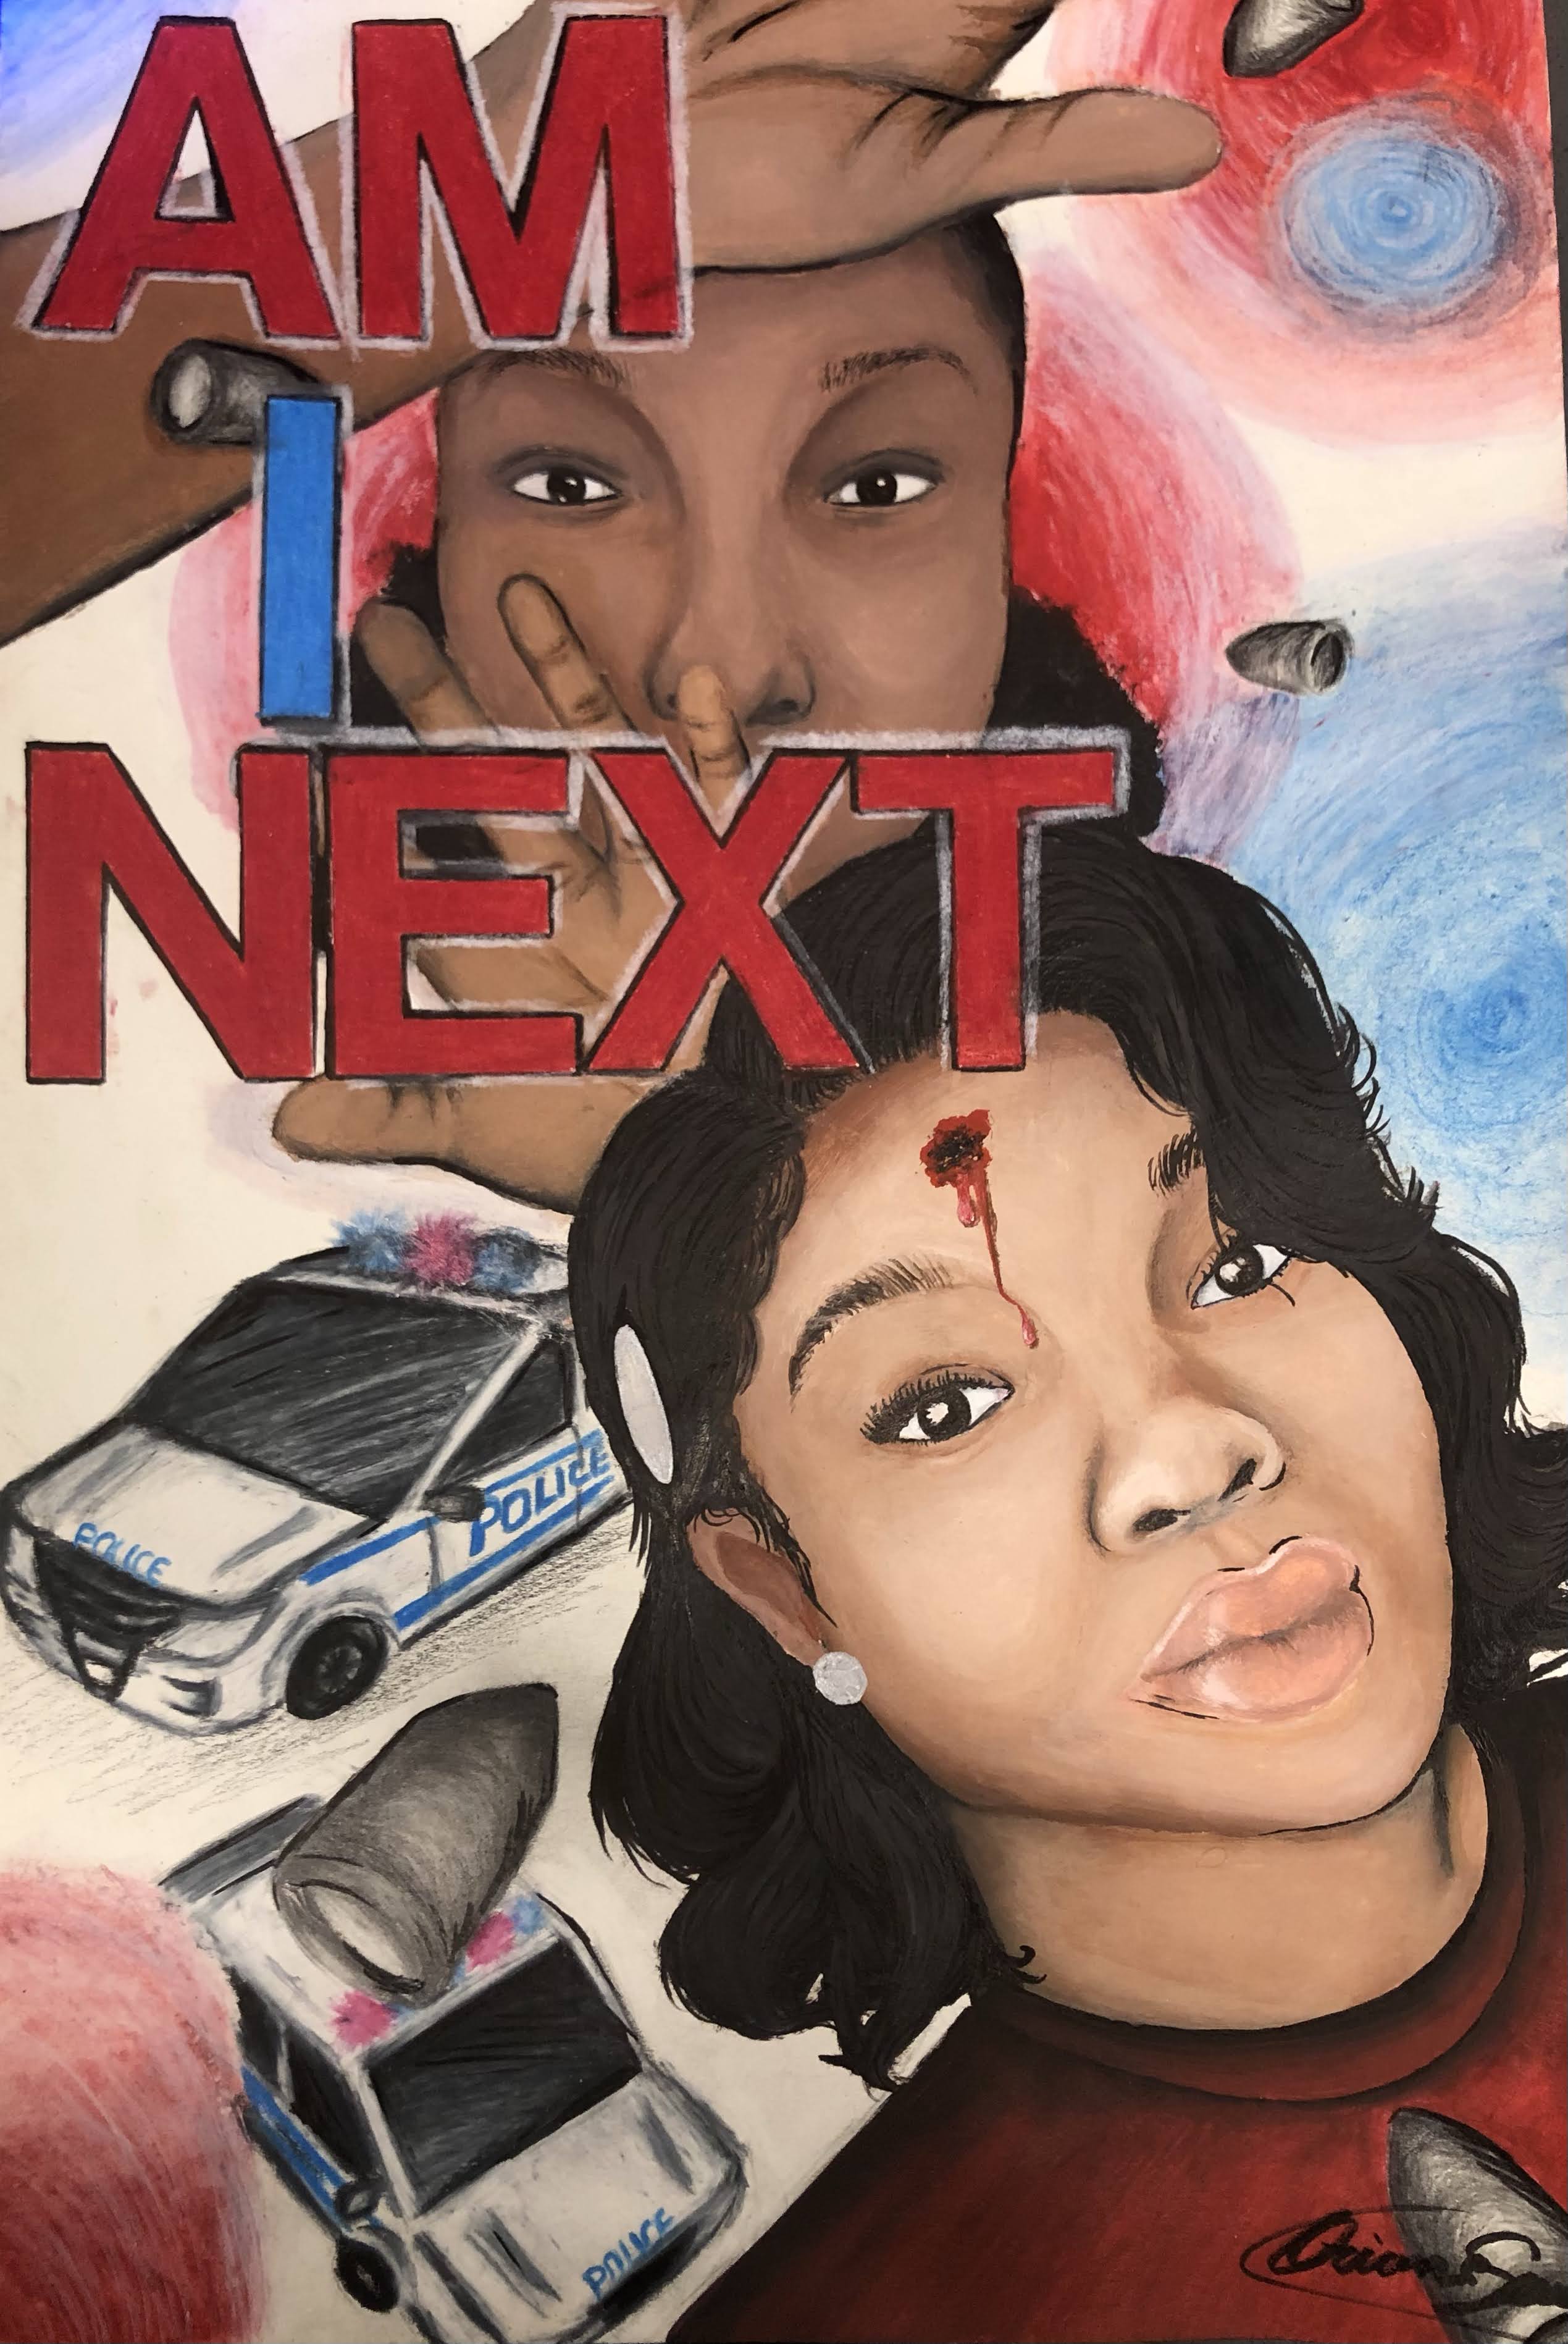 A portrait of Breonna Taylor with the text "Am I next"